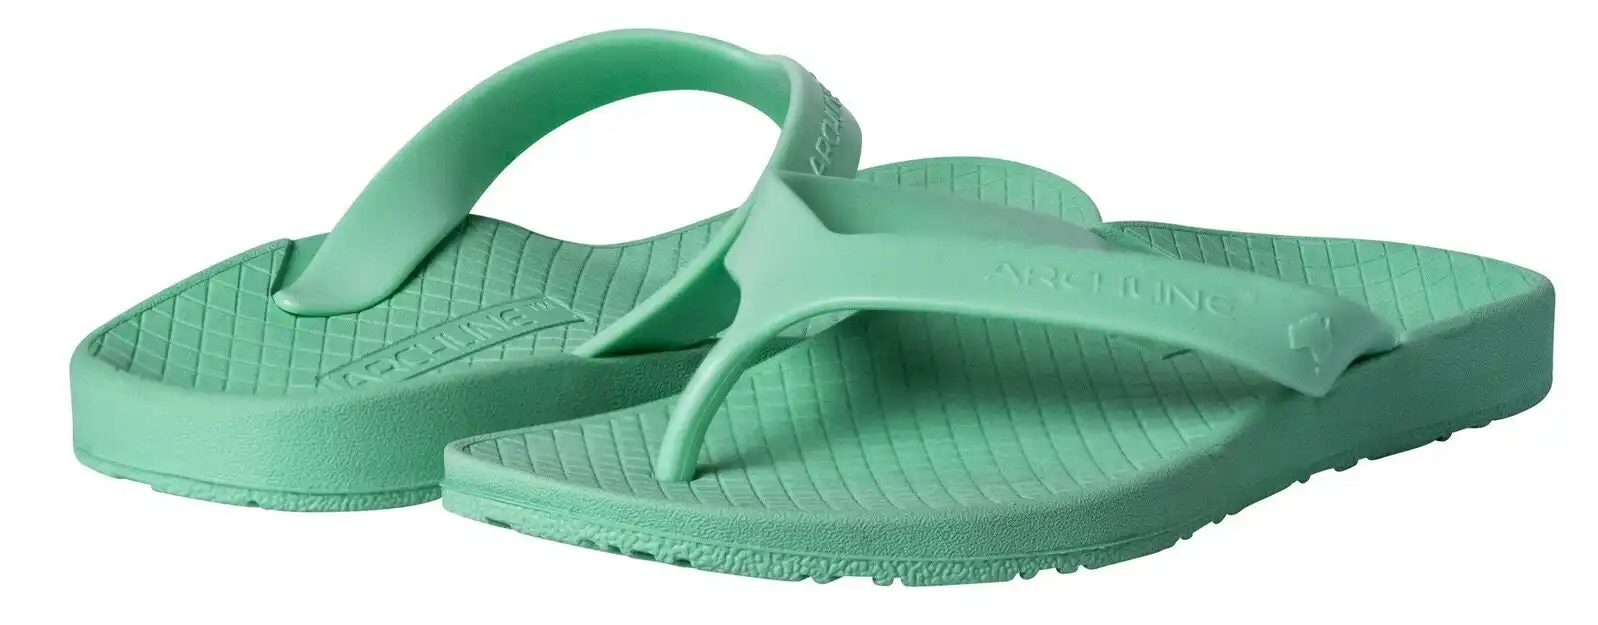 Archline Orthotic Thongs Arch Support Shoes Medical Footwear Flip Flops - Dew Green